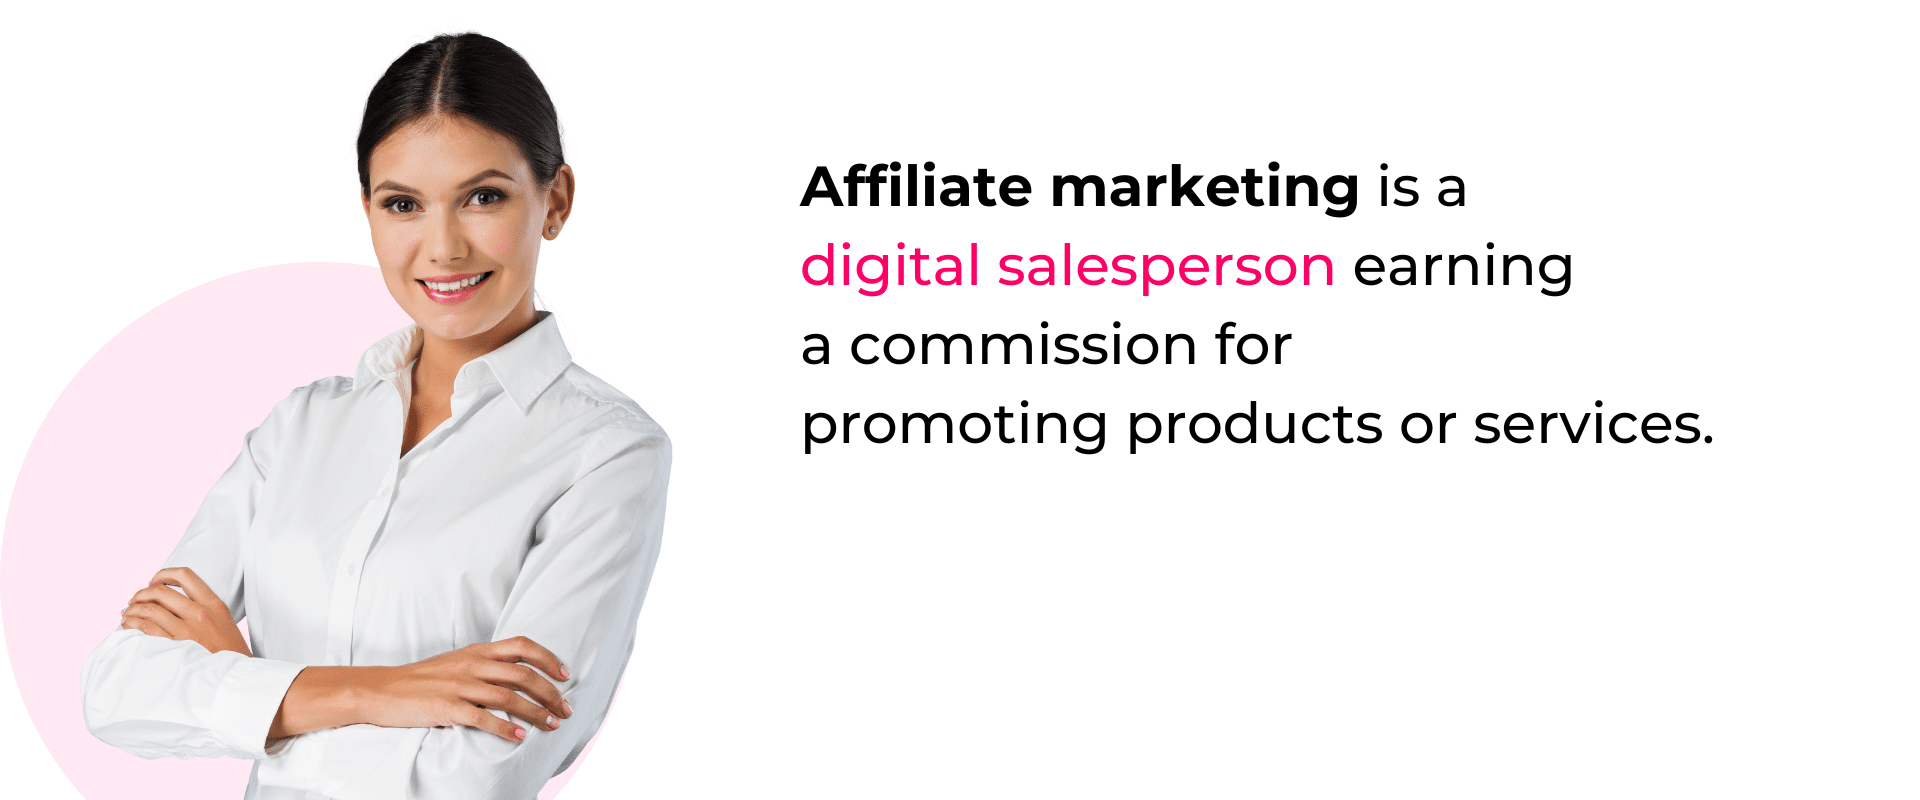 Affiliate marketing is a digital salesperson learning a commission for promoting products and services.